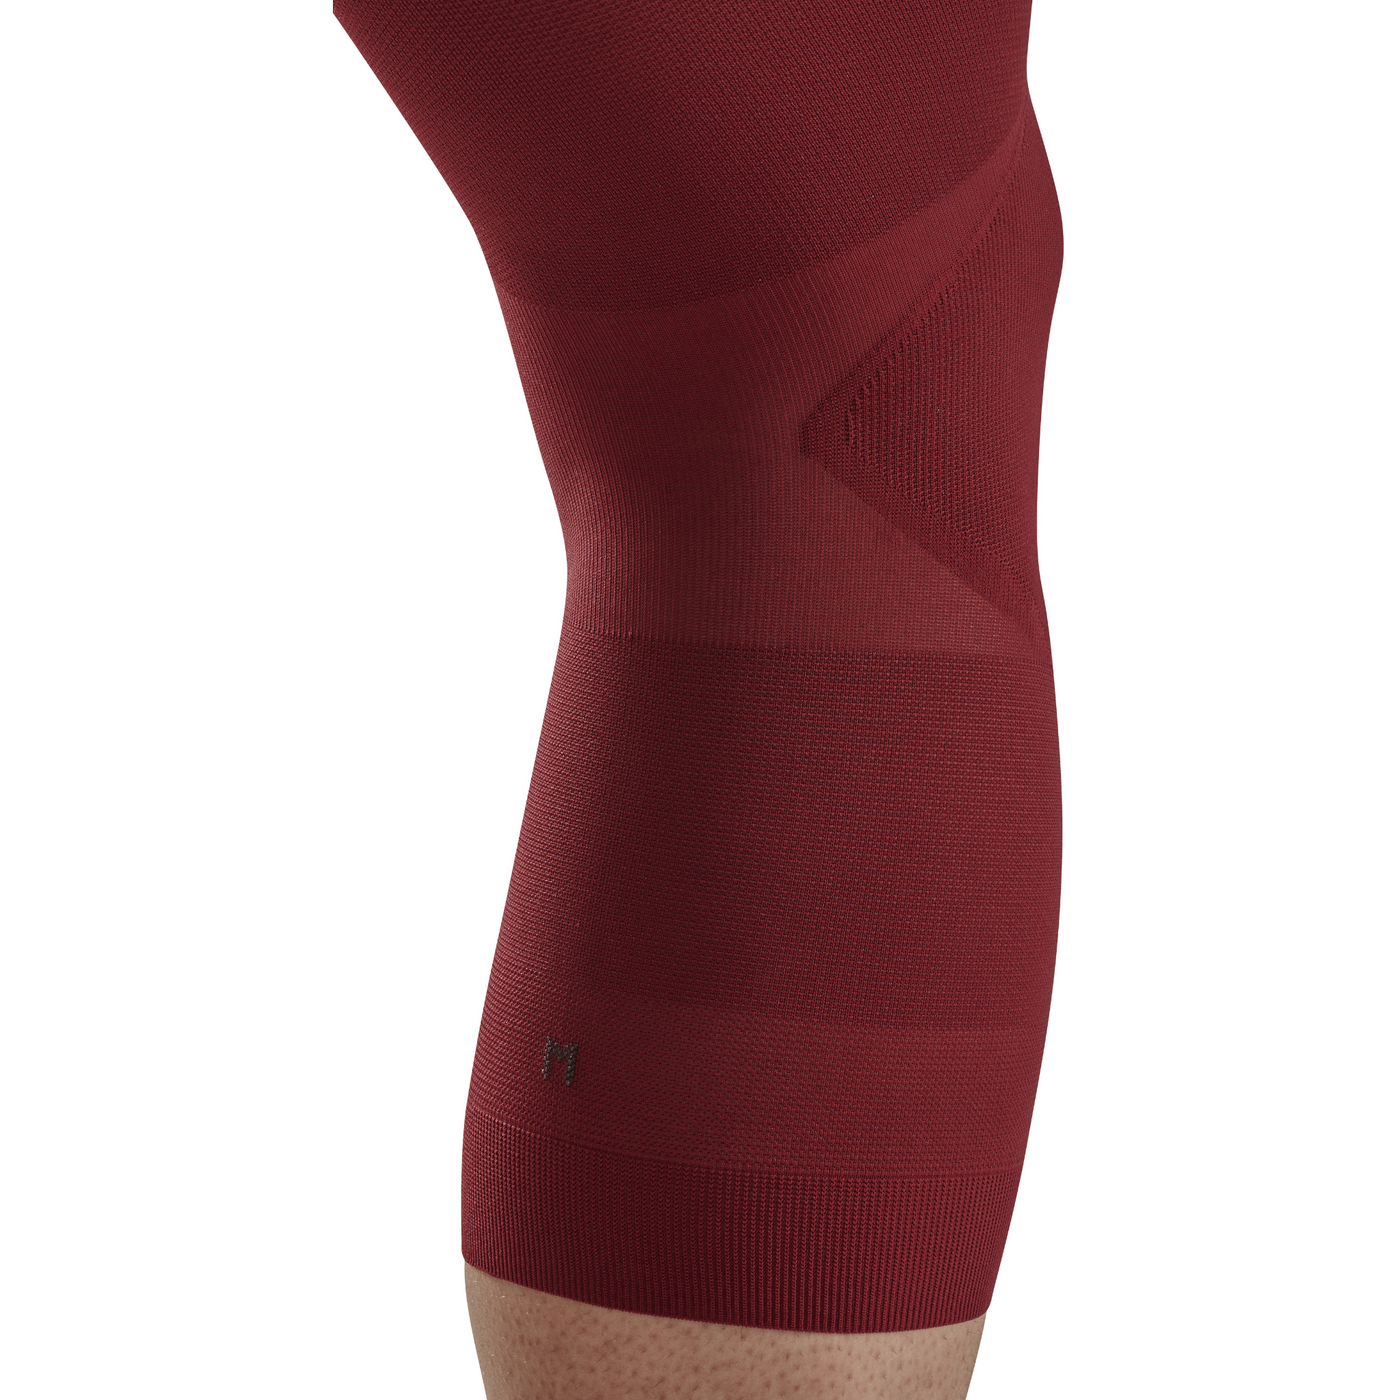 Light Support Knee Sleeve, Red-Light, Back Detail View